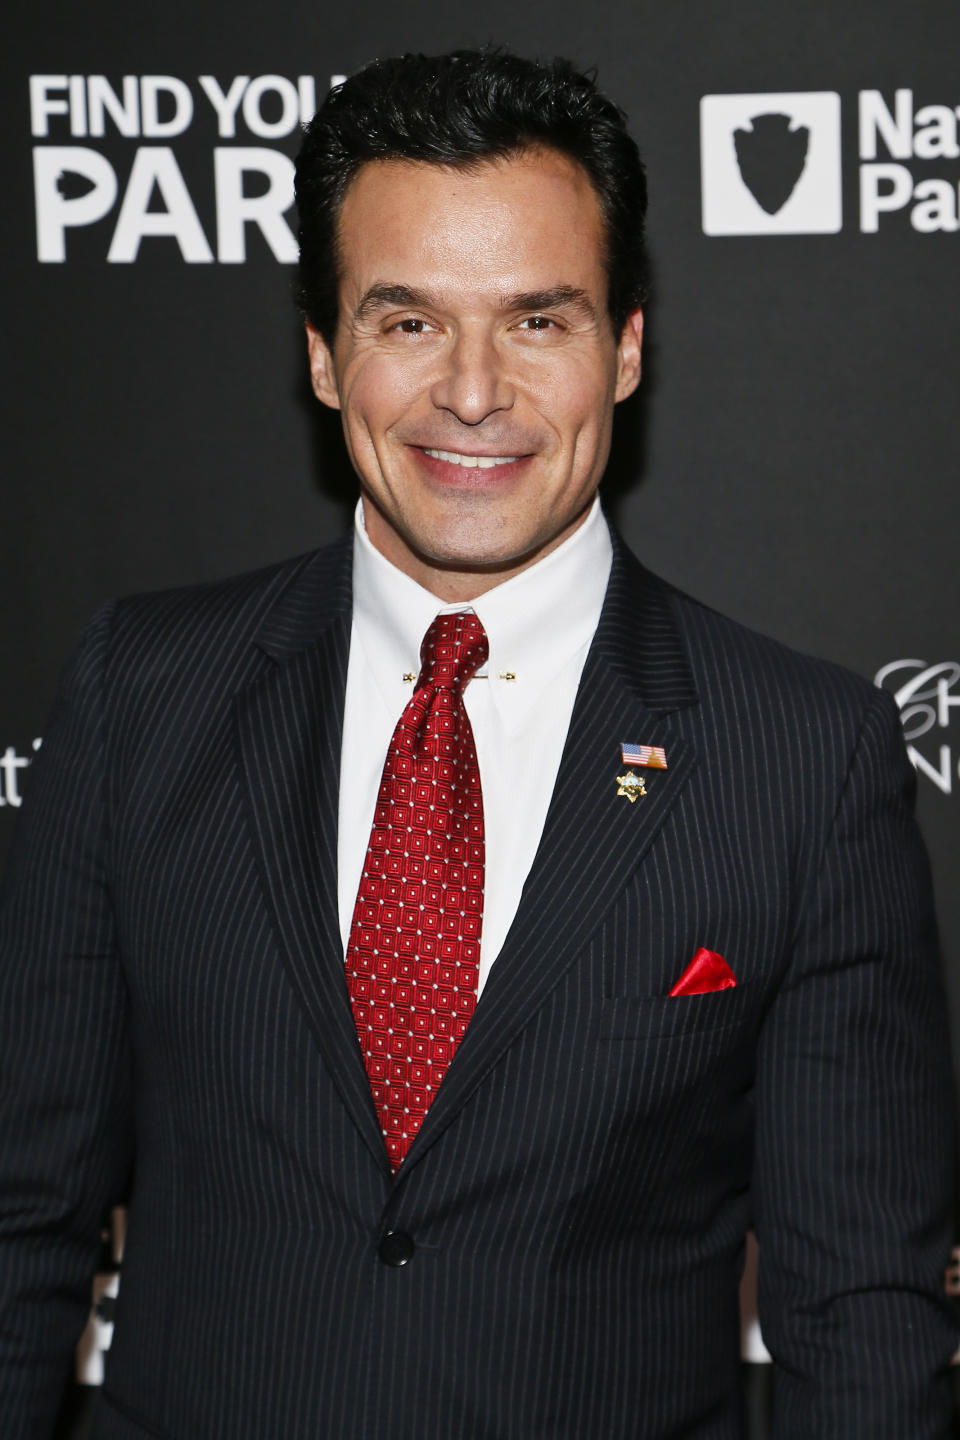 Man in pinstripe suit with patterned red tie and lapel pin smiles at a National Parks event